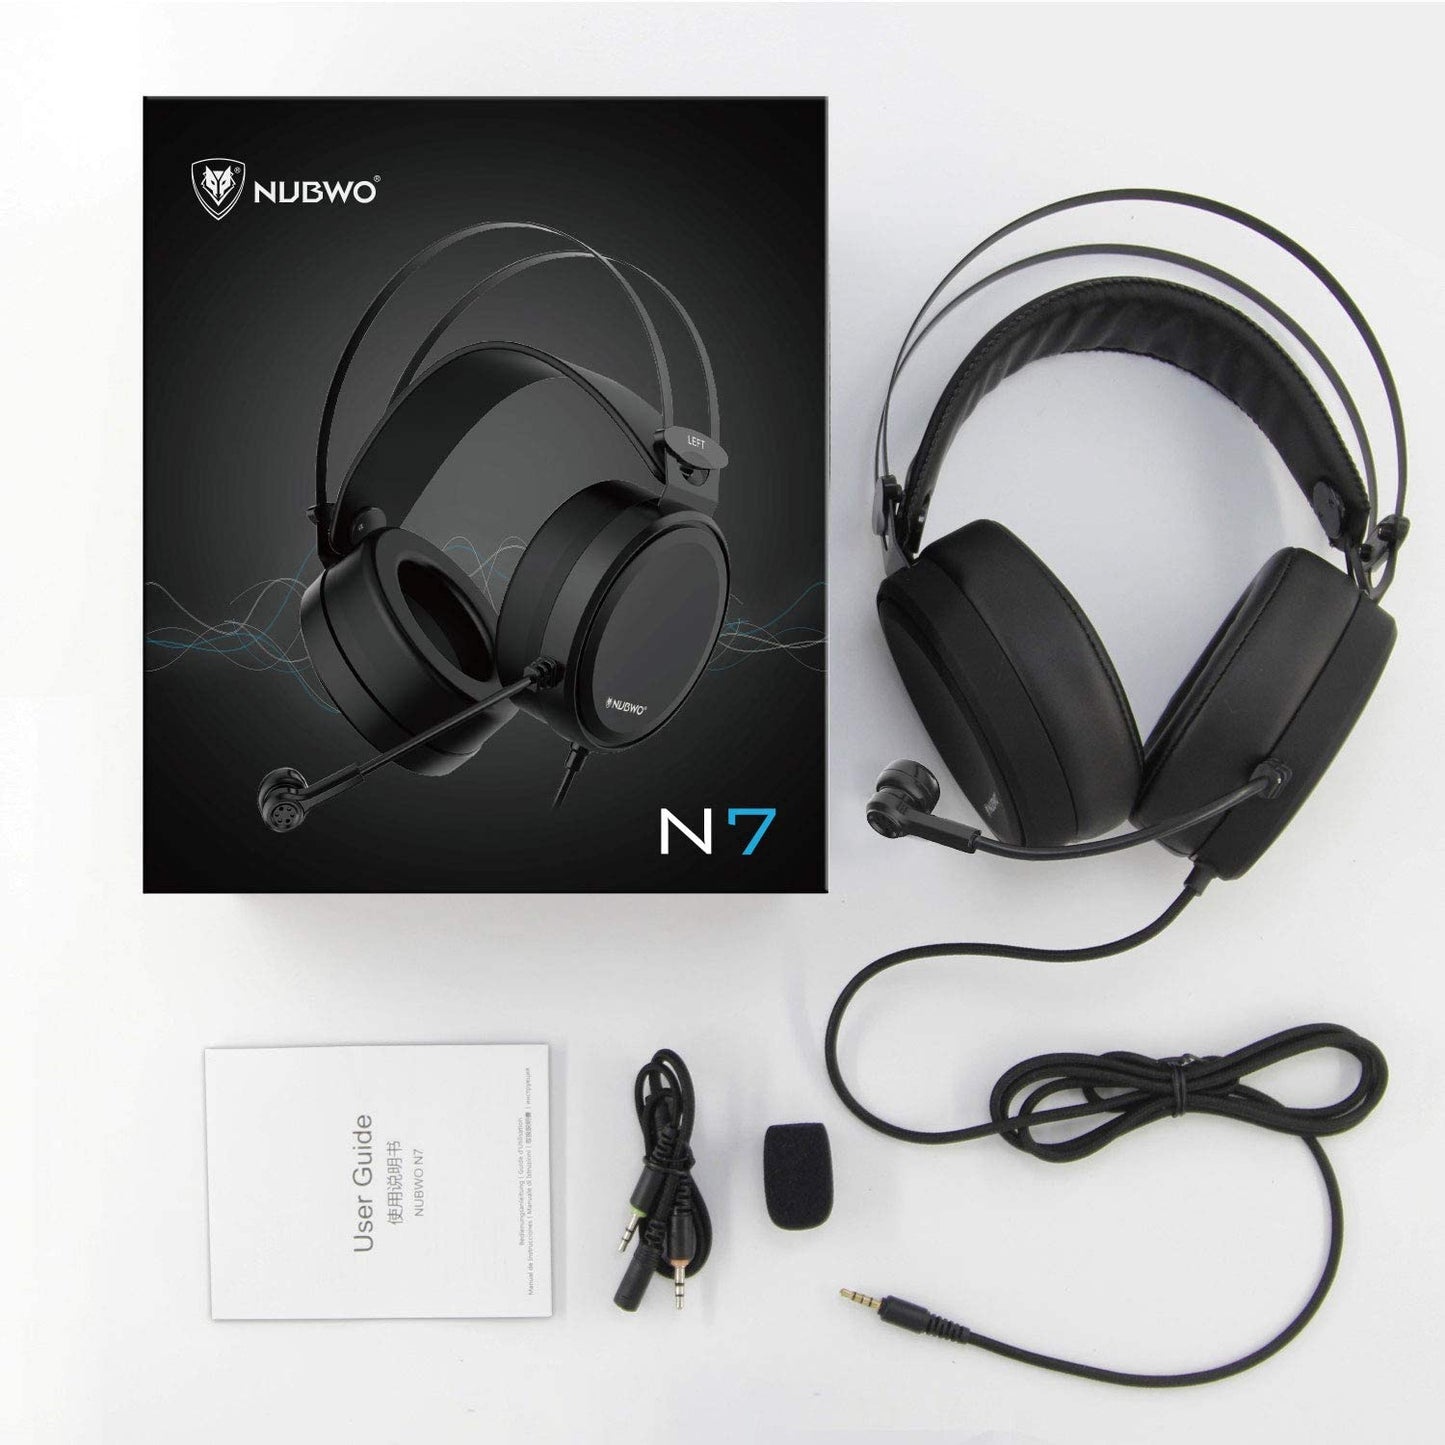 GAMING HEADSET NUBWO N7 - PS4 - XBOXONE - PC - SWITCH - Easy Video Game